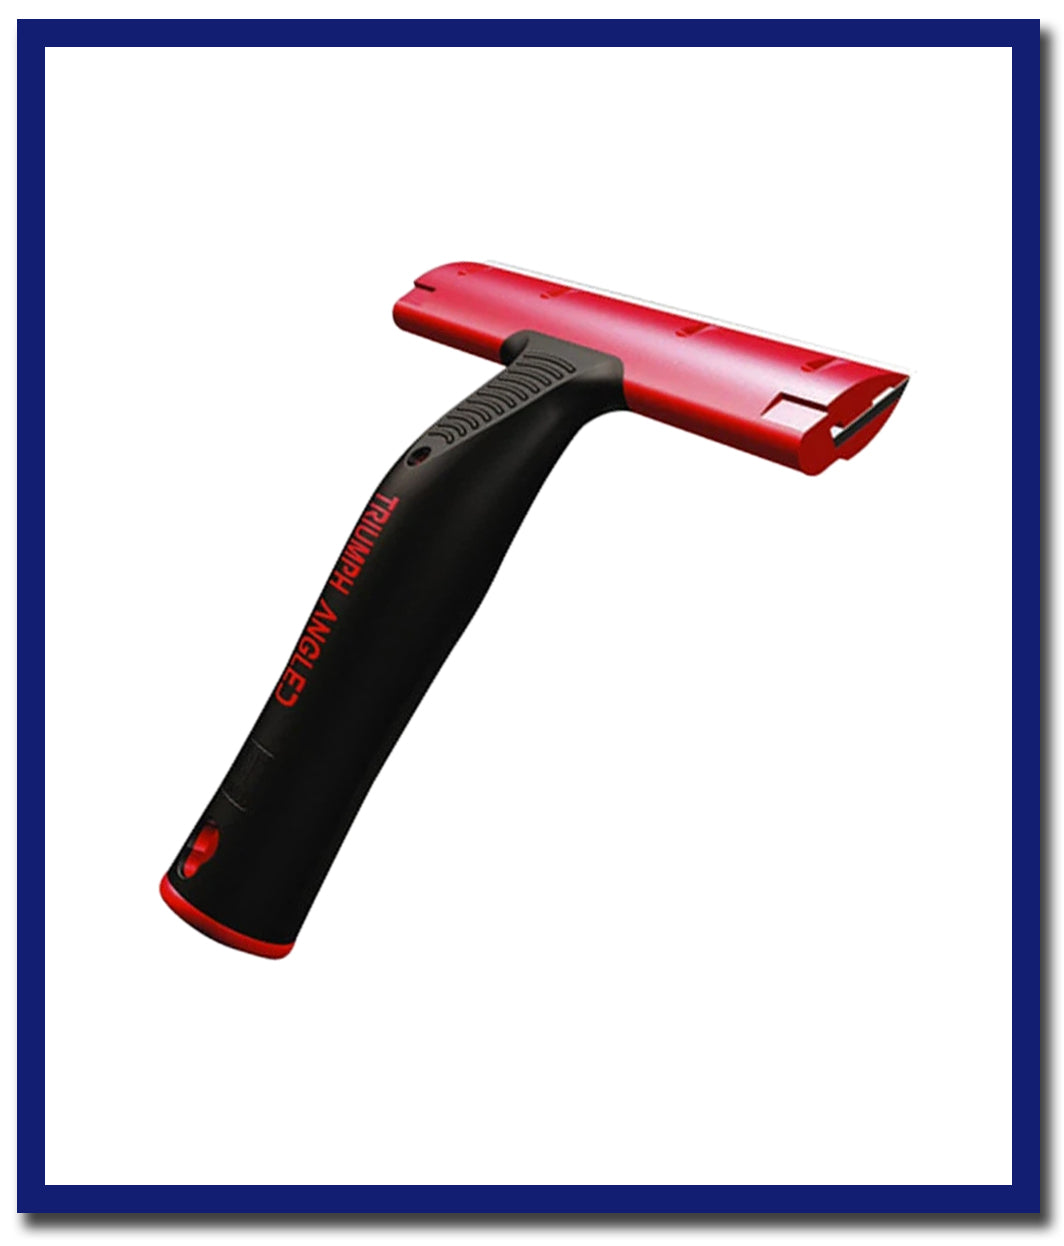 Edco Triumph MK3 Angled Scraper - 1 Pc - Stone Doctor Australia - Cleaning Tools > Window Cleaning > Accessories